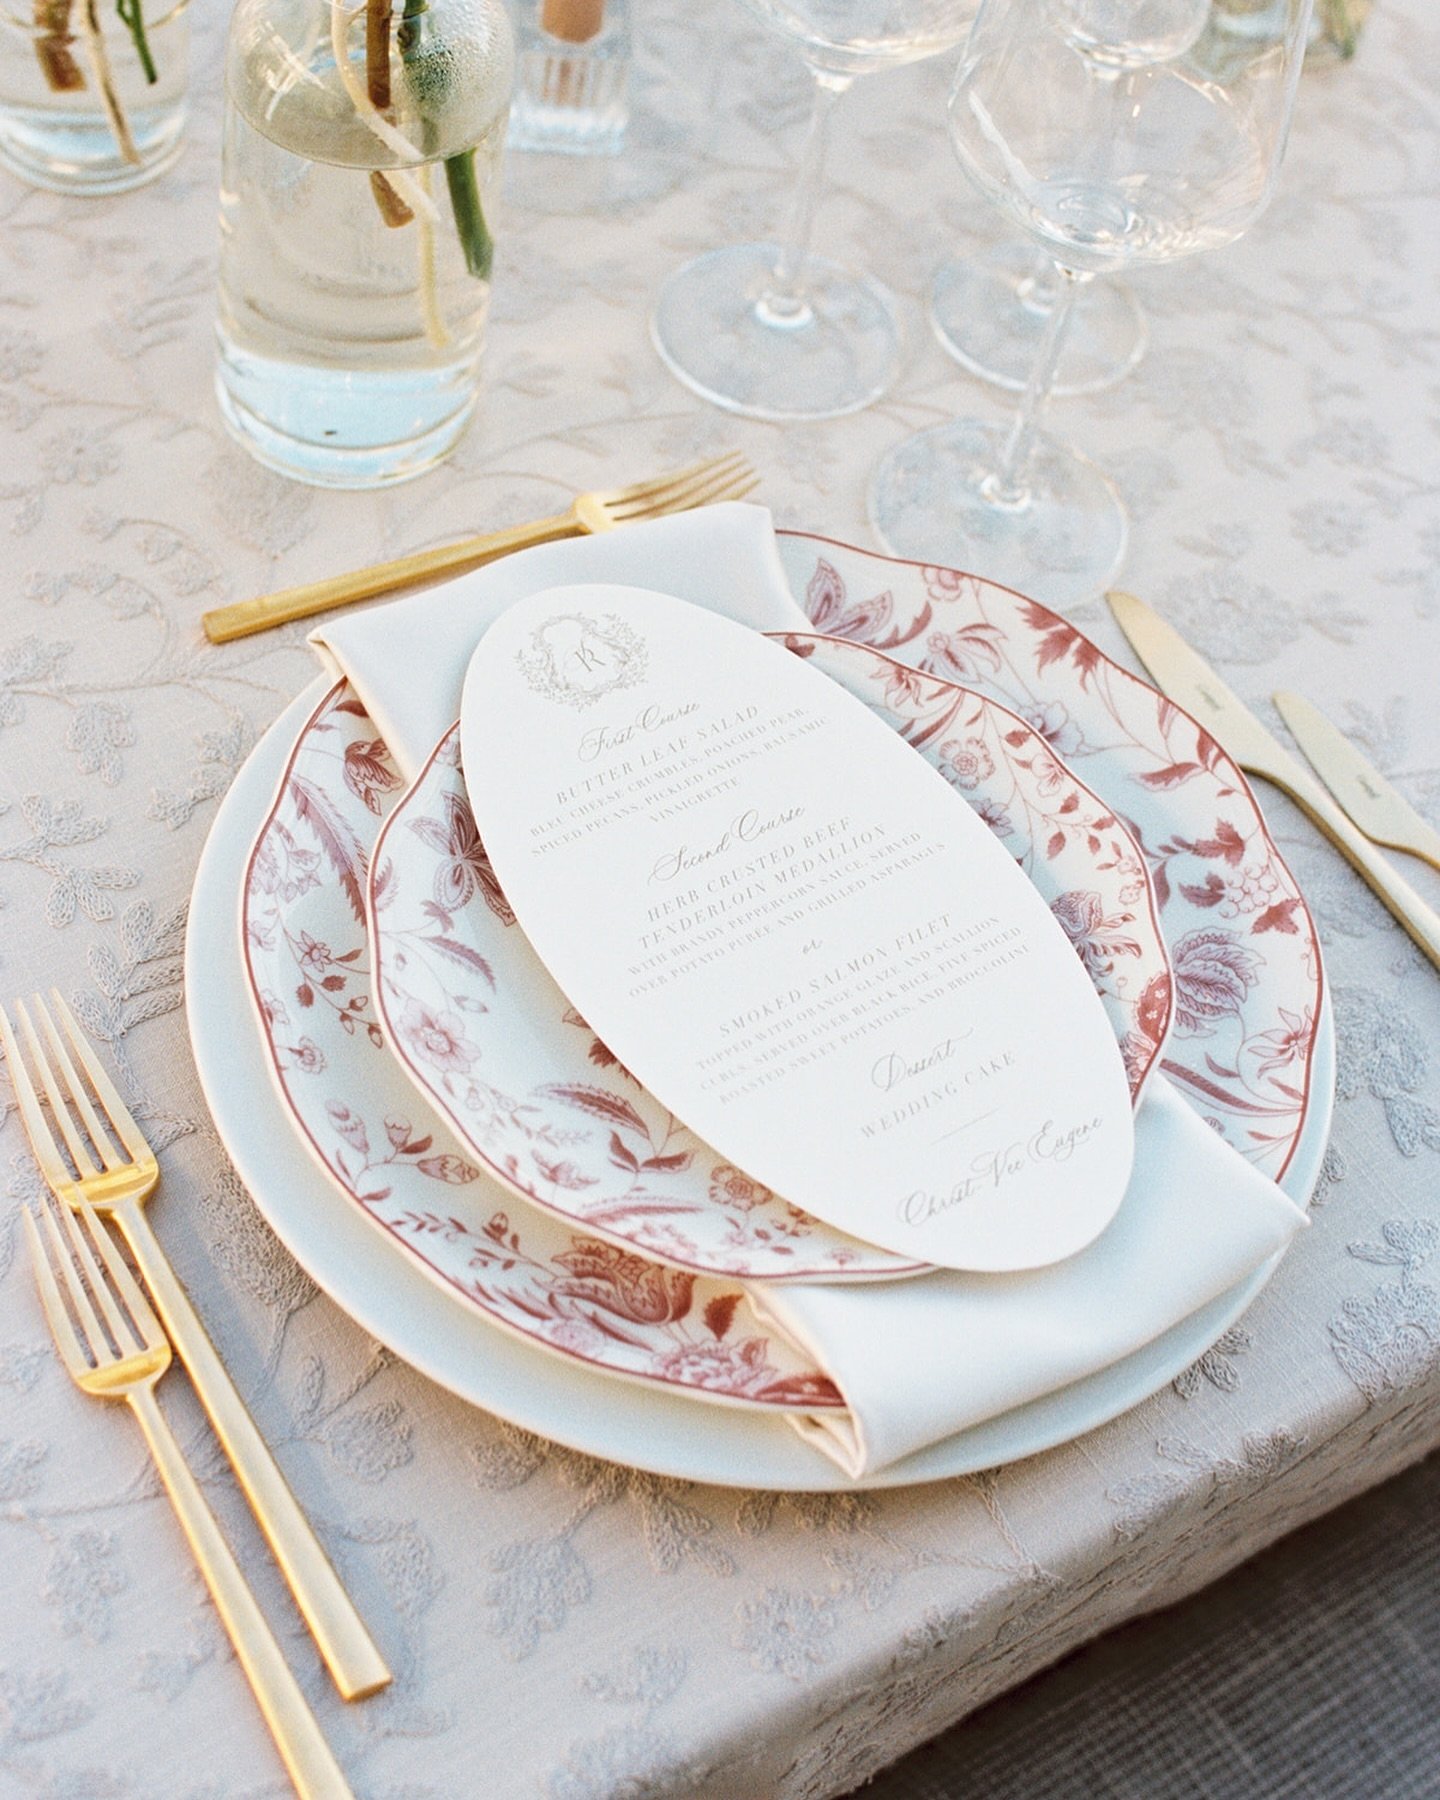 Linens and chargers and menus, oh my! 
.
.
.
Venue: @thehillsideestatetx
Planning &amp; Design: @bastonishedevents
Photography &amp; Videography: @thelockharts
Florals: @wedfullyyours
Catering: @vestalscatering
Entertainment: @shutdownproductions
Sta